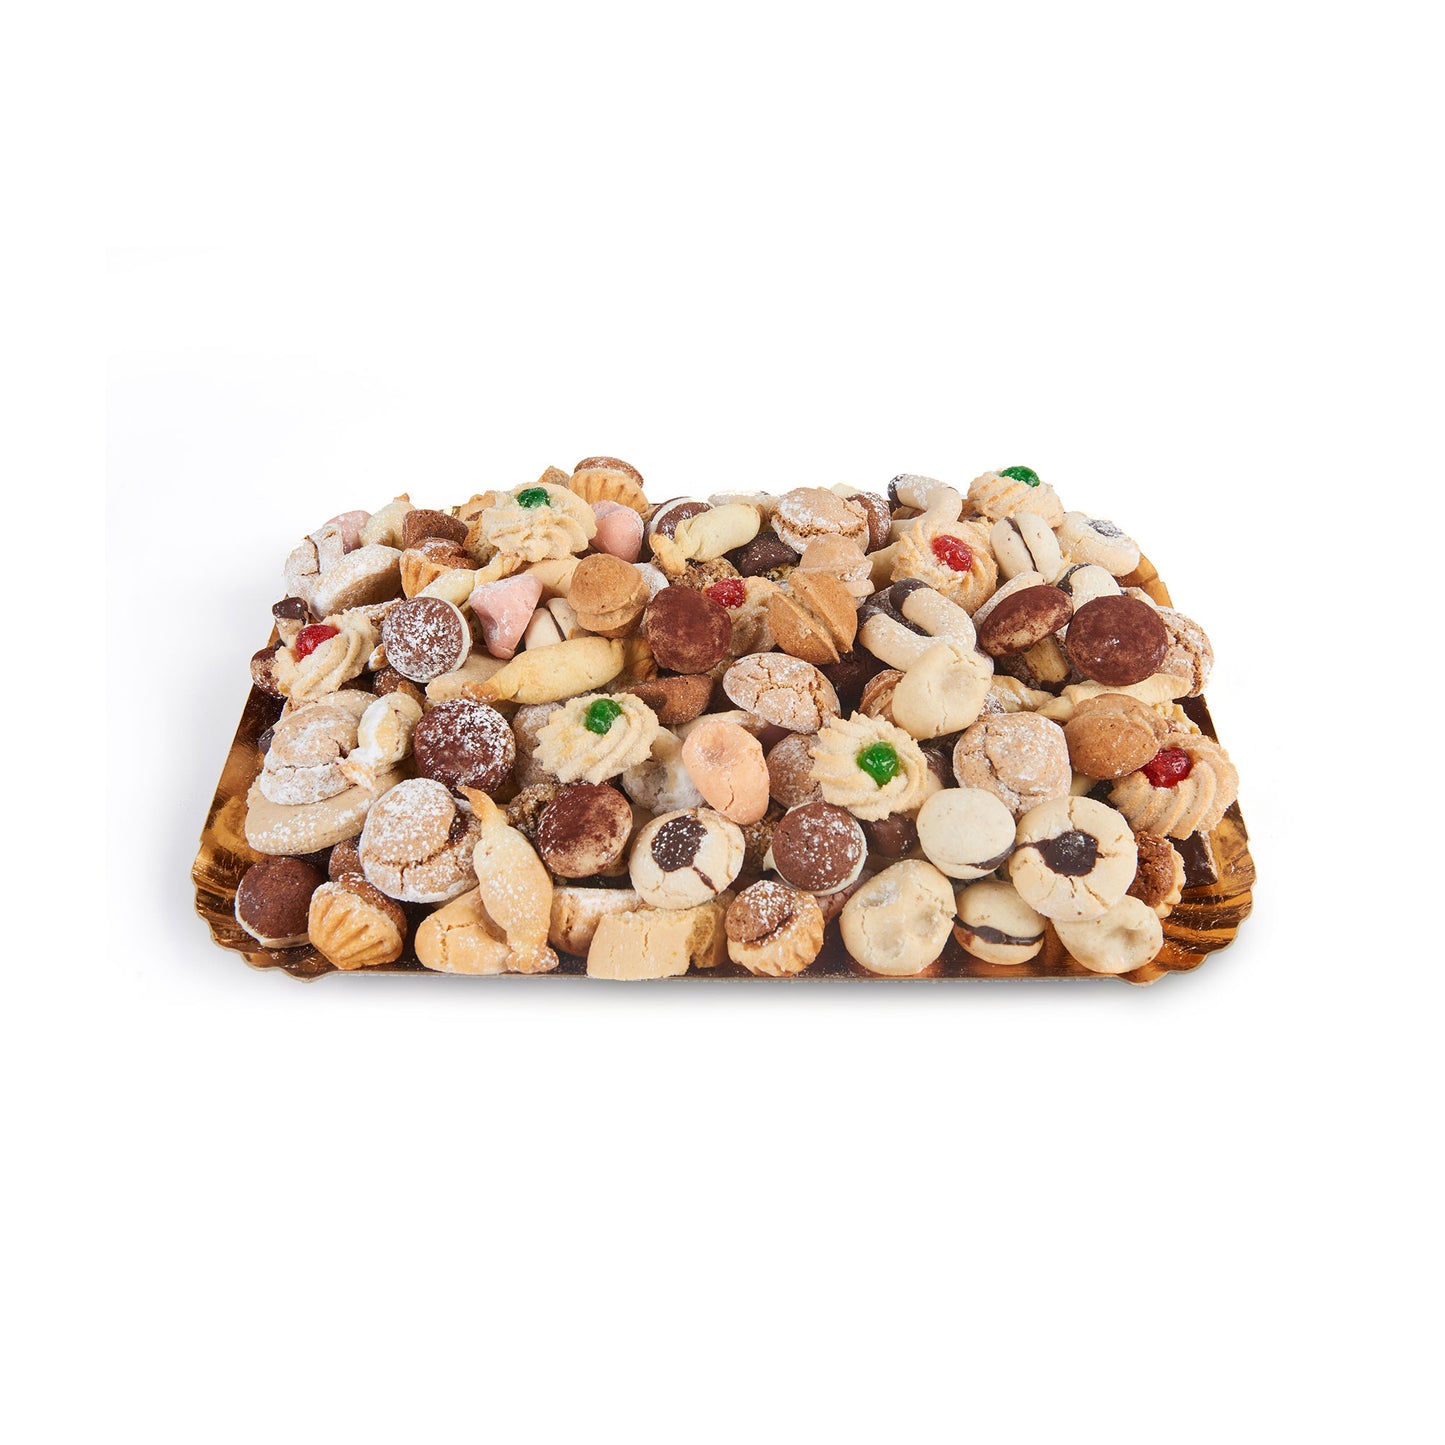 Gourmet Cookie Tray - 9lbs